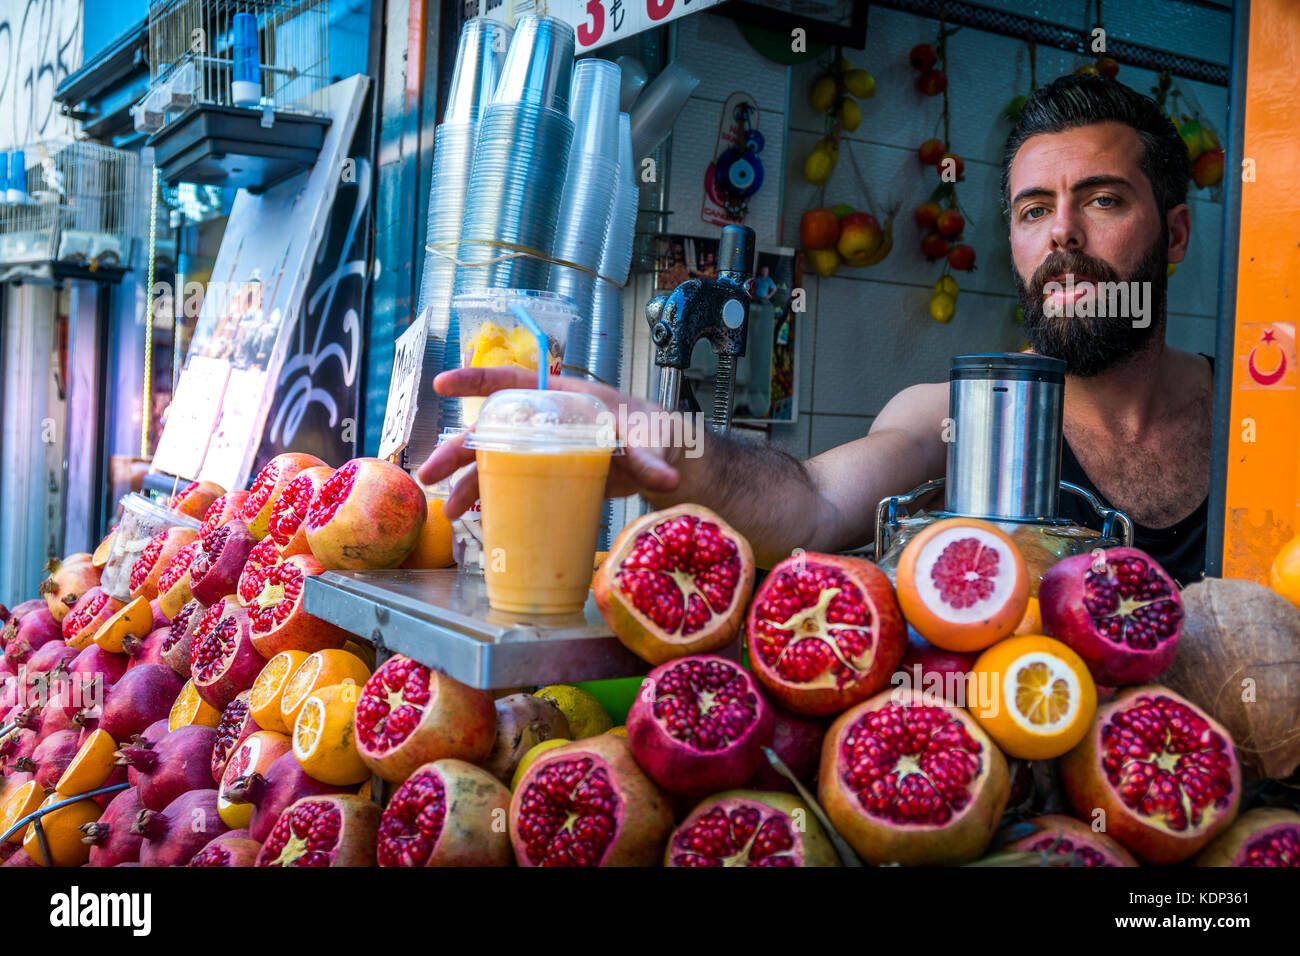 Street vendor sells Pomegranate juice at a stall in Istanbul Turkey Stock Photo